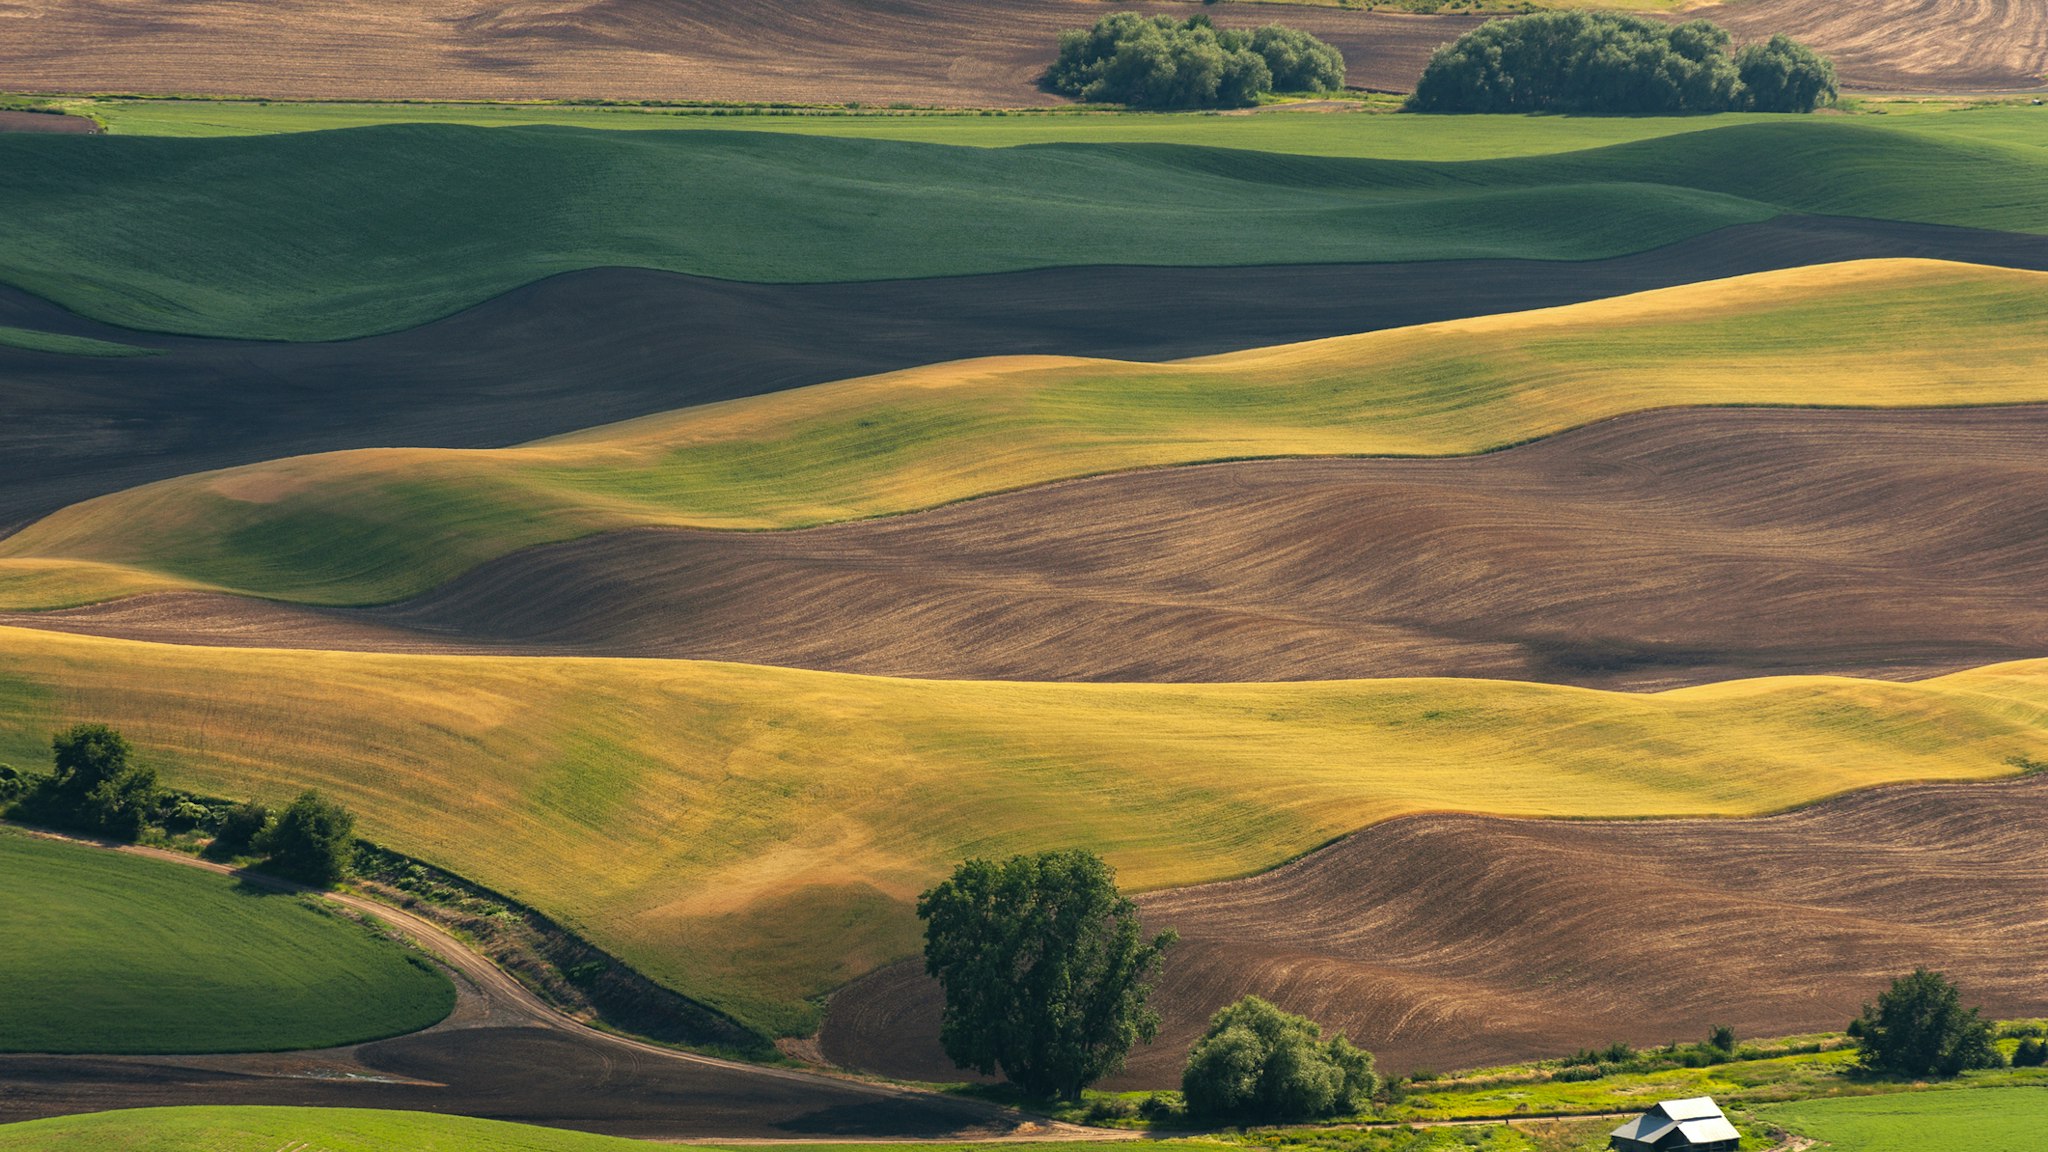 High above the Palouse Hills on the eastern edge of Washington, Steptoe Butte offers unparalleled views of a truly unique landscape.